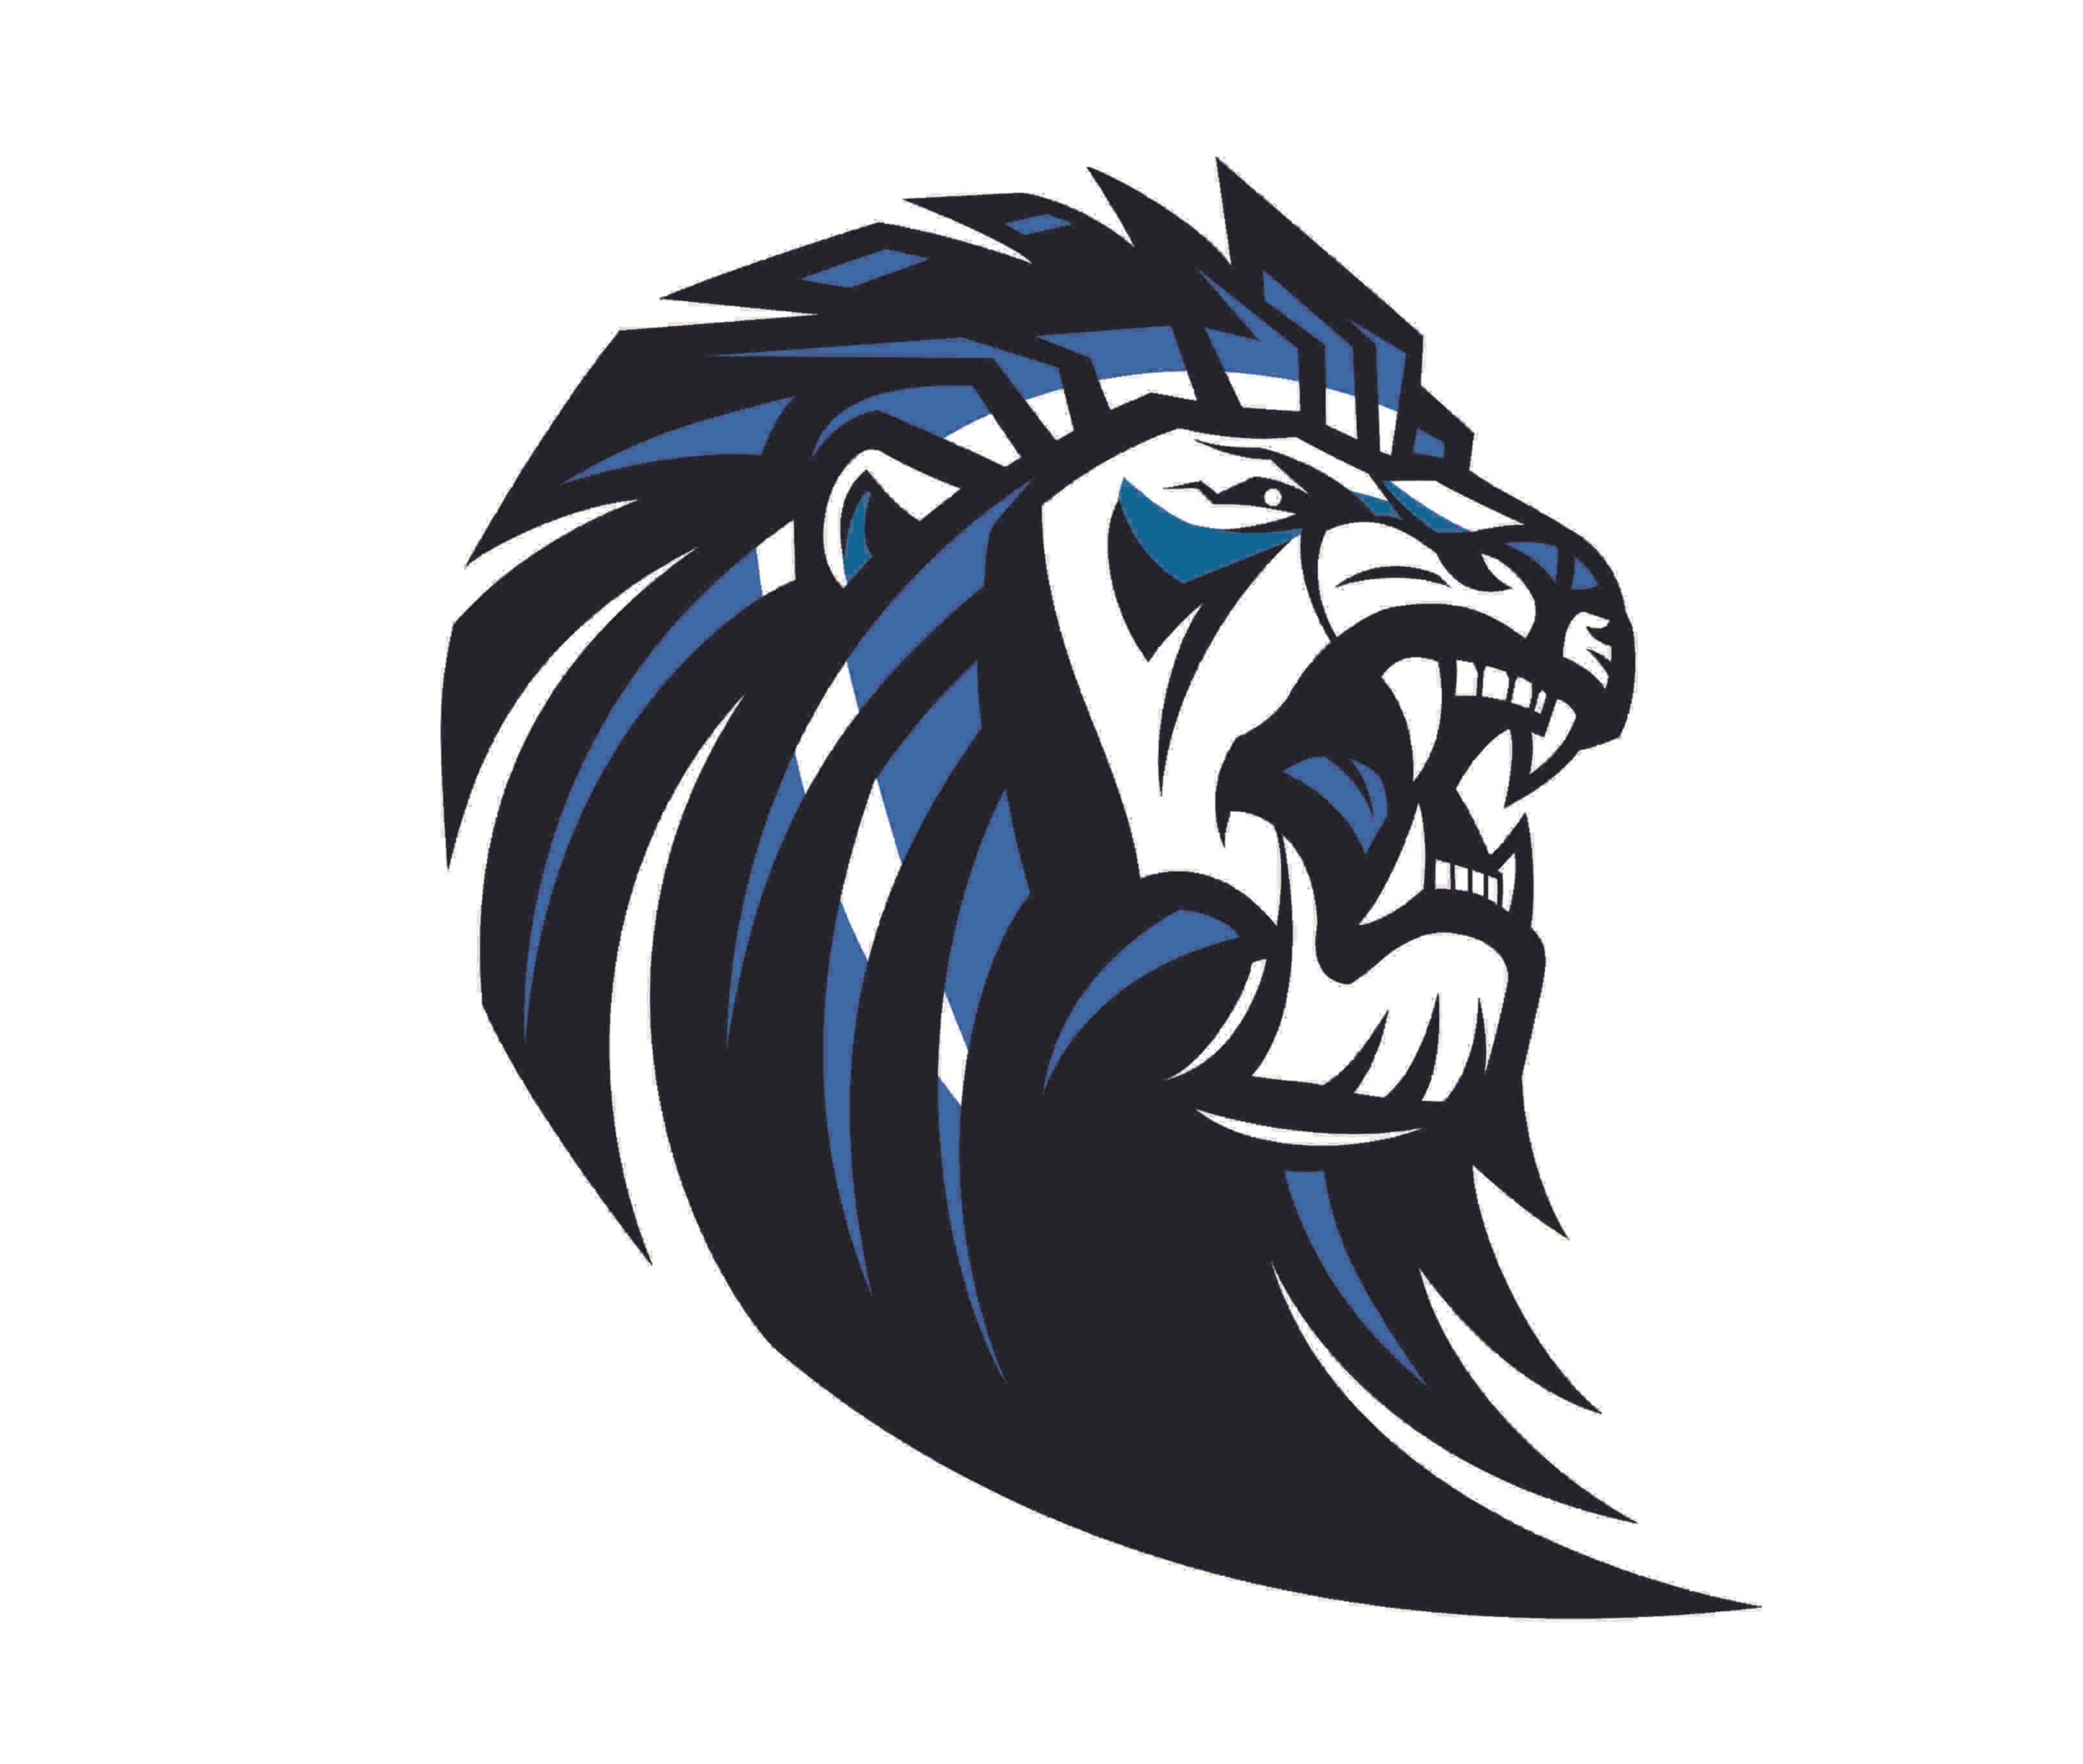 Different variations of the school's logo White background with blue, black and white lion.